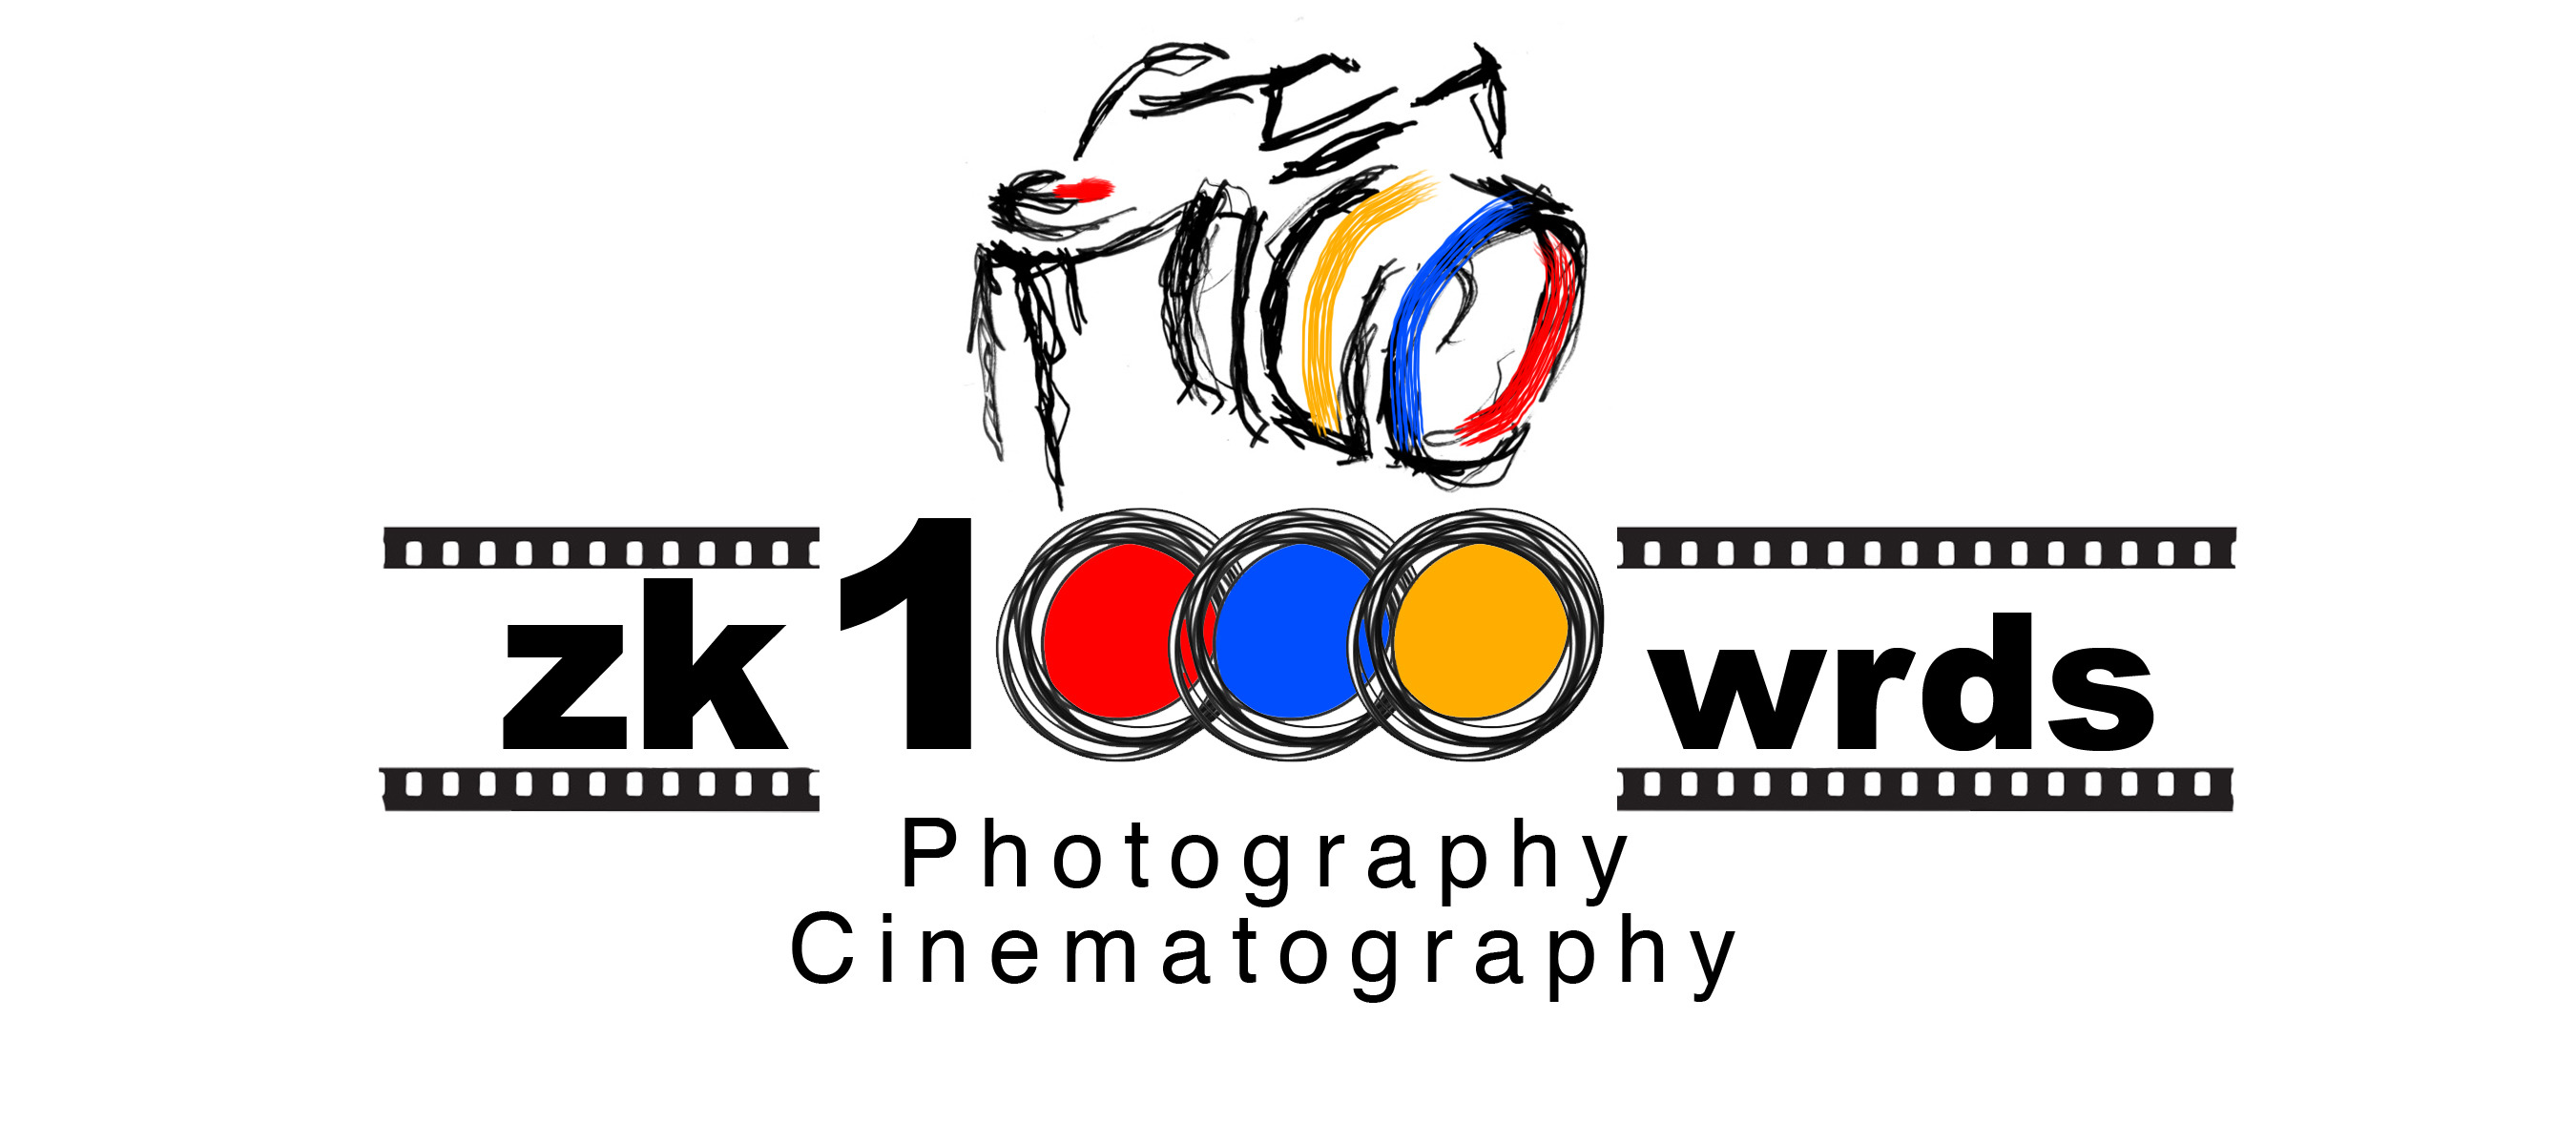 ZK1000wrds Photography, Videography